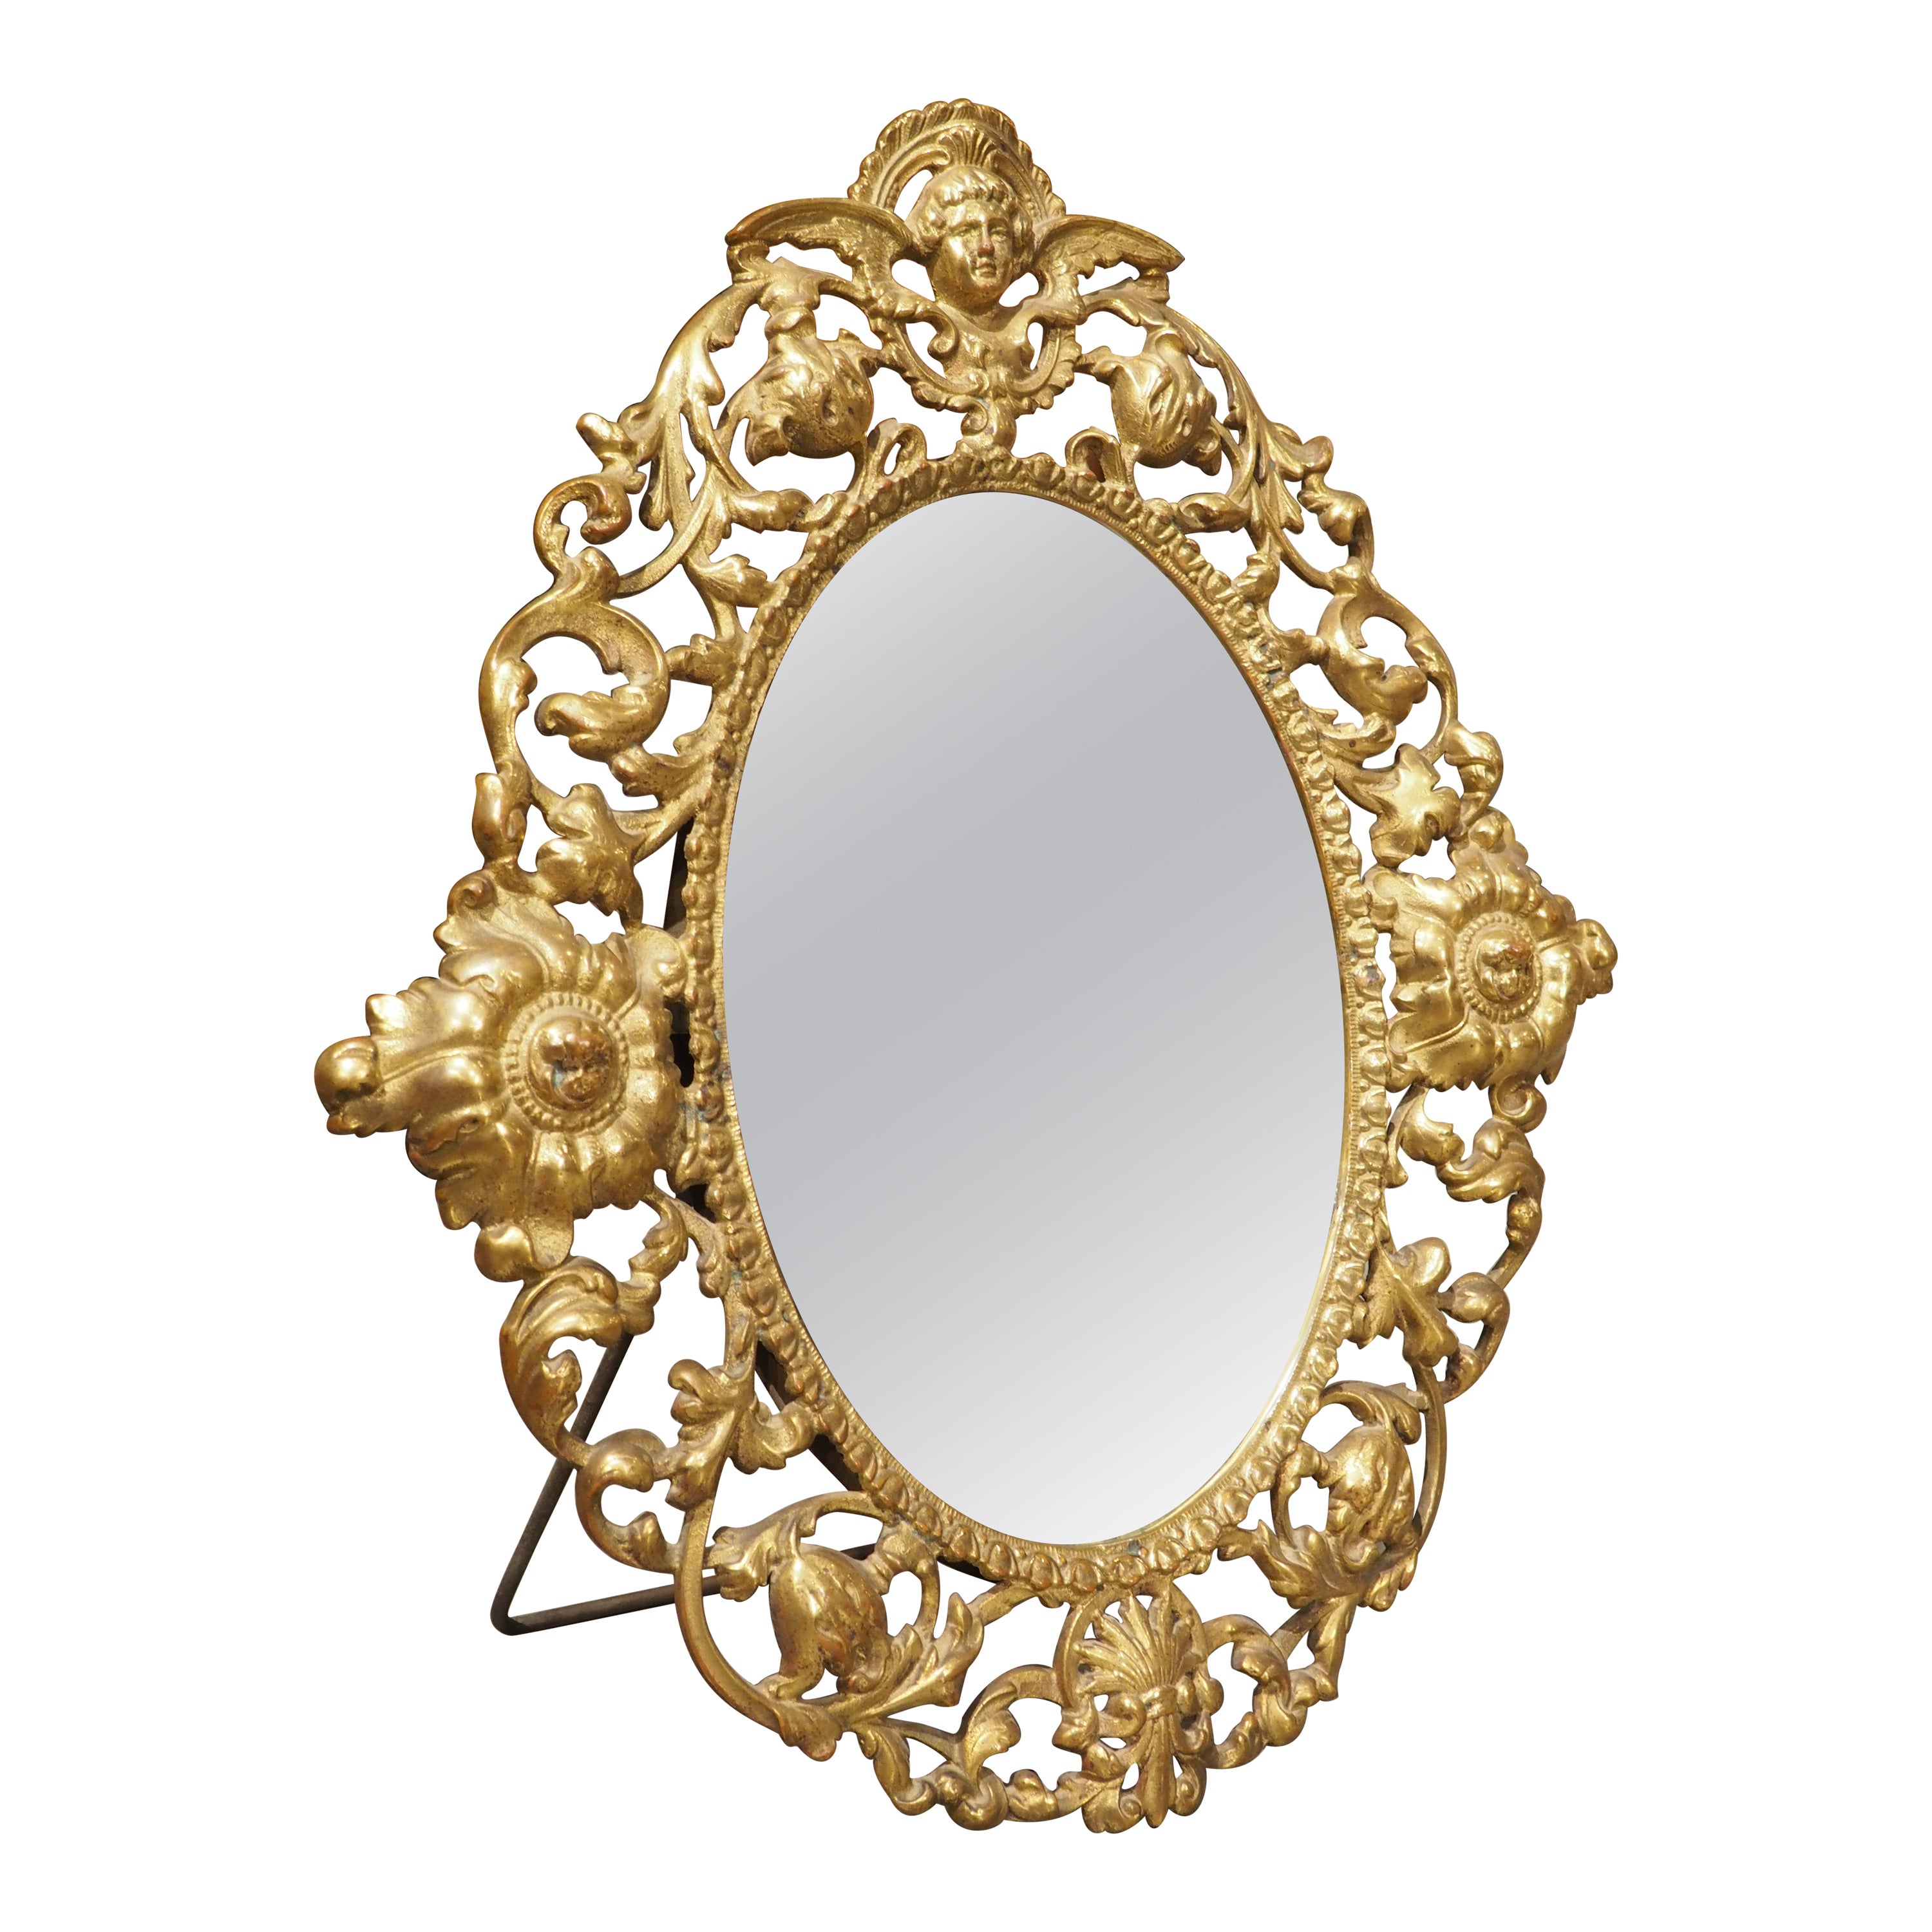 Circa 1900 Oval Gilt Bronze Table Mirror from Italy For Sale